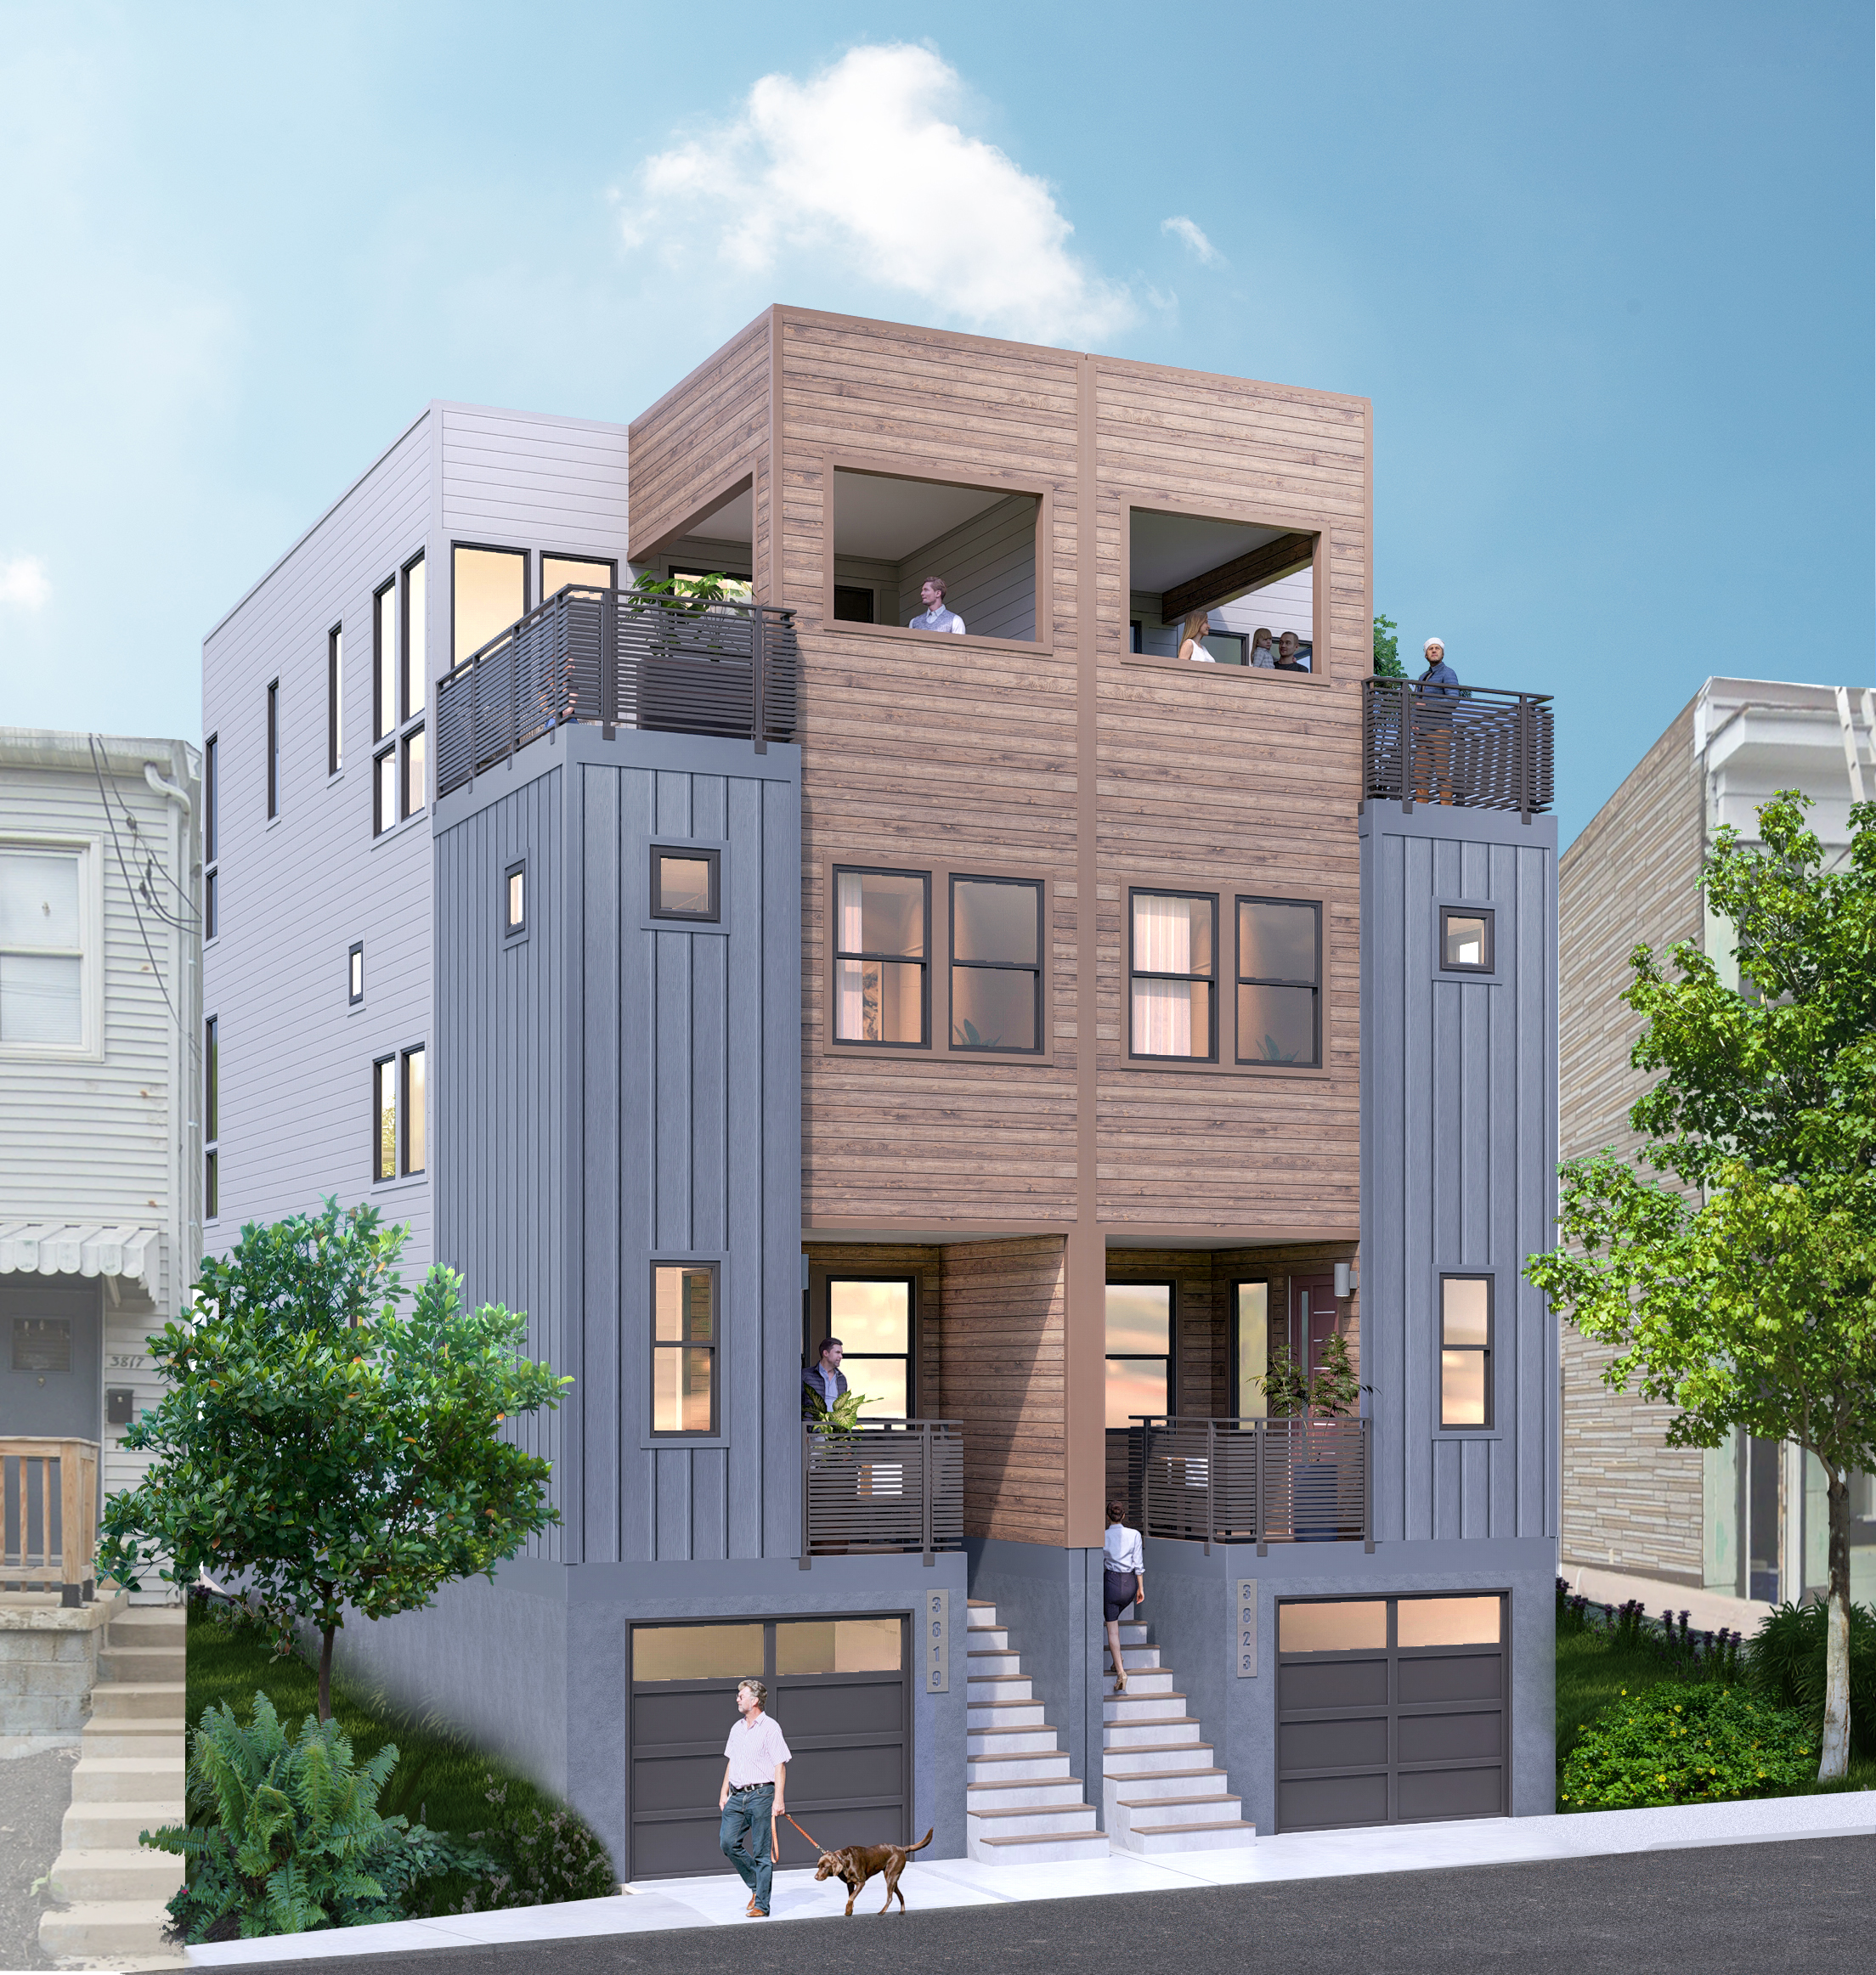 Rendering of townhome